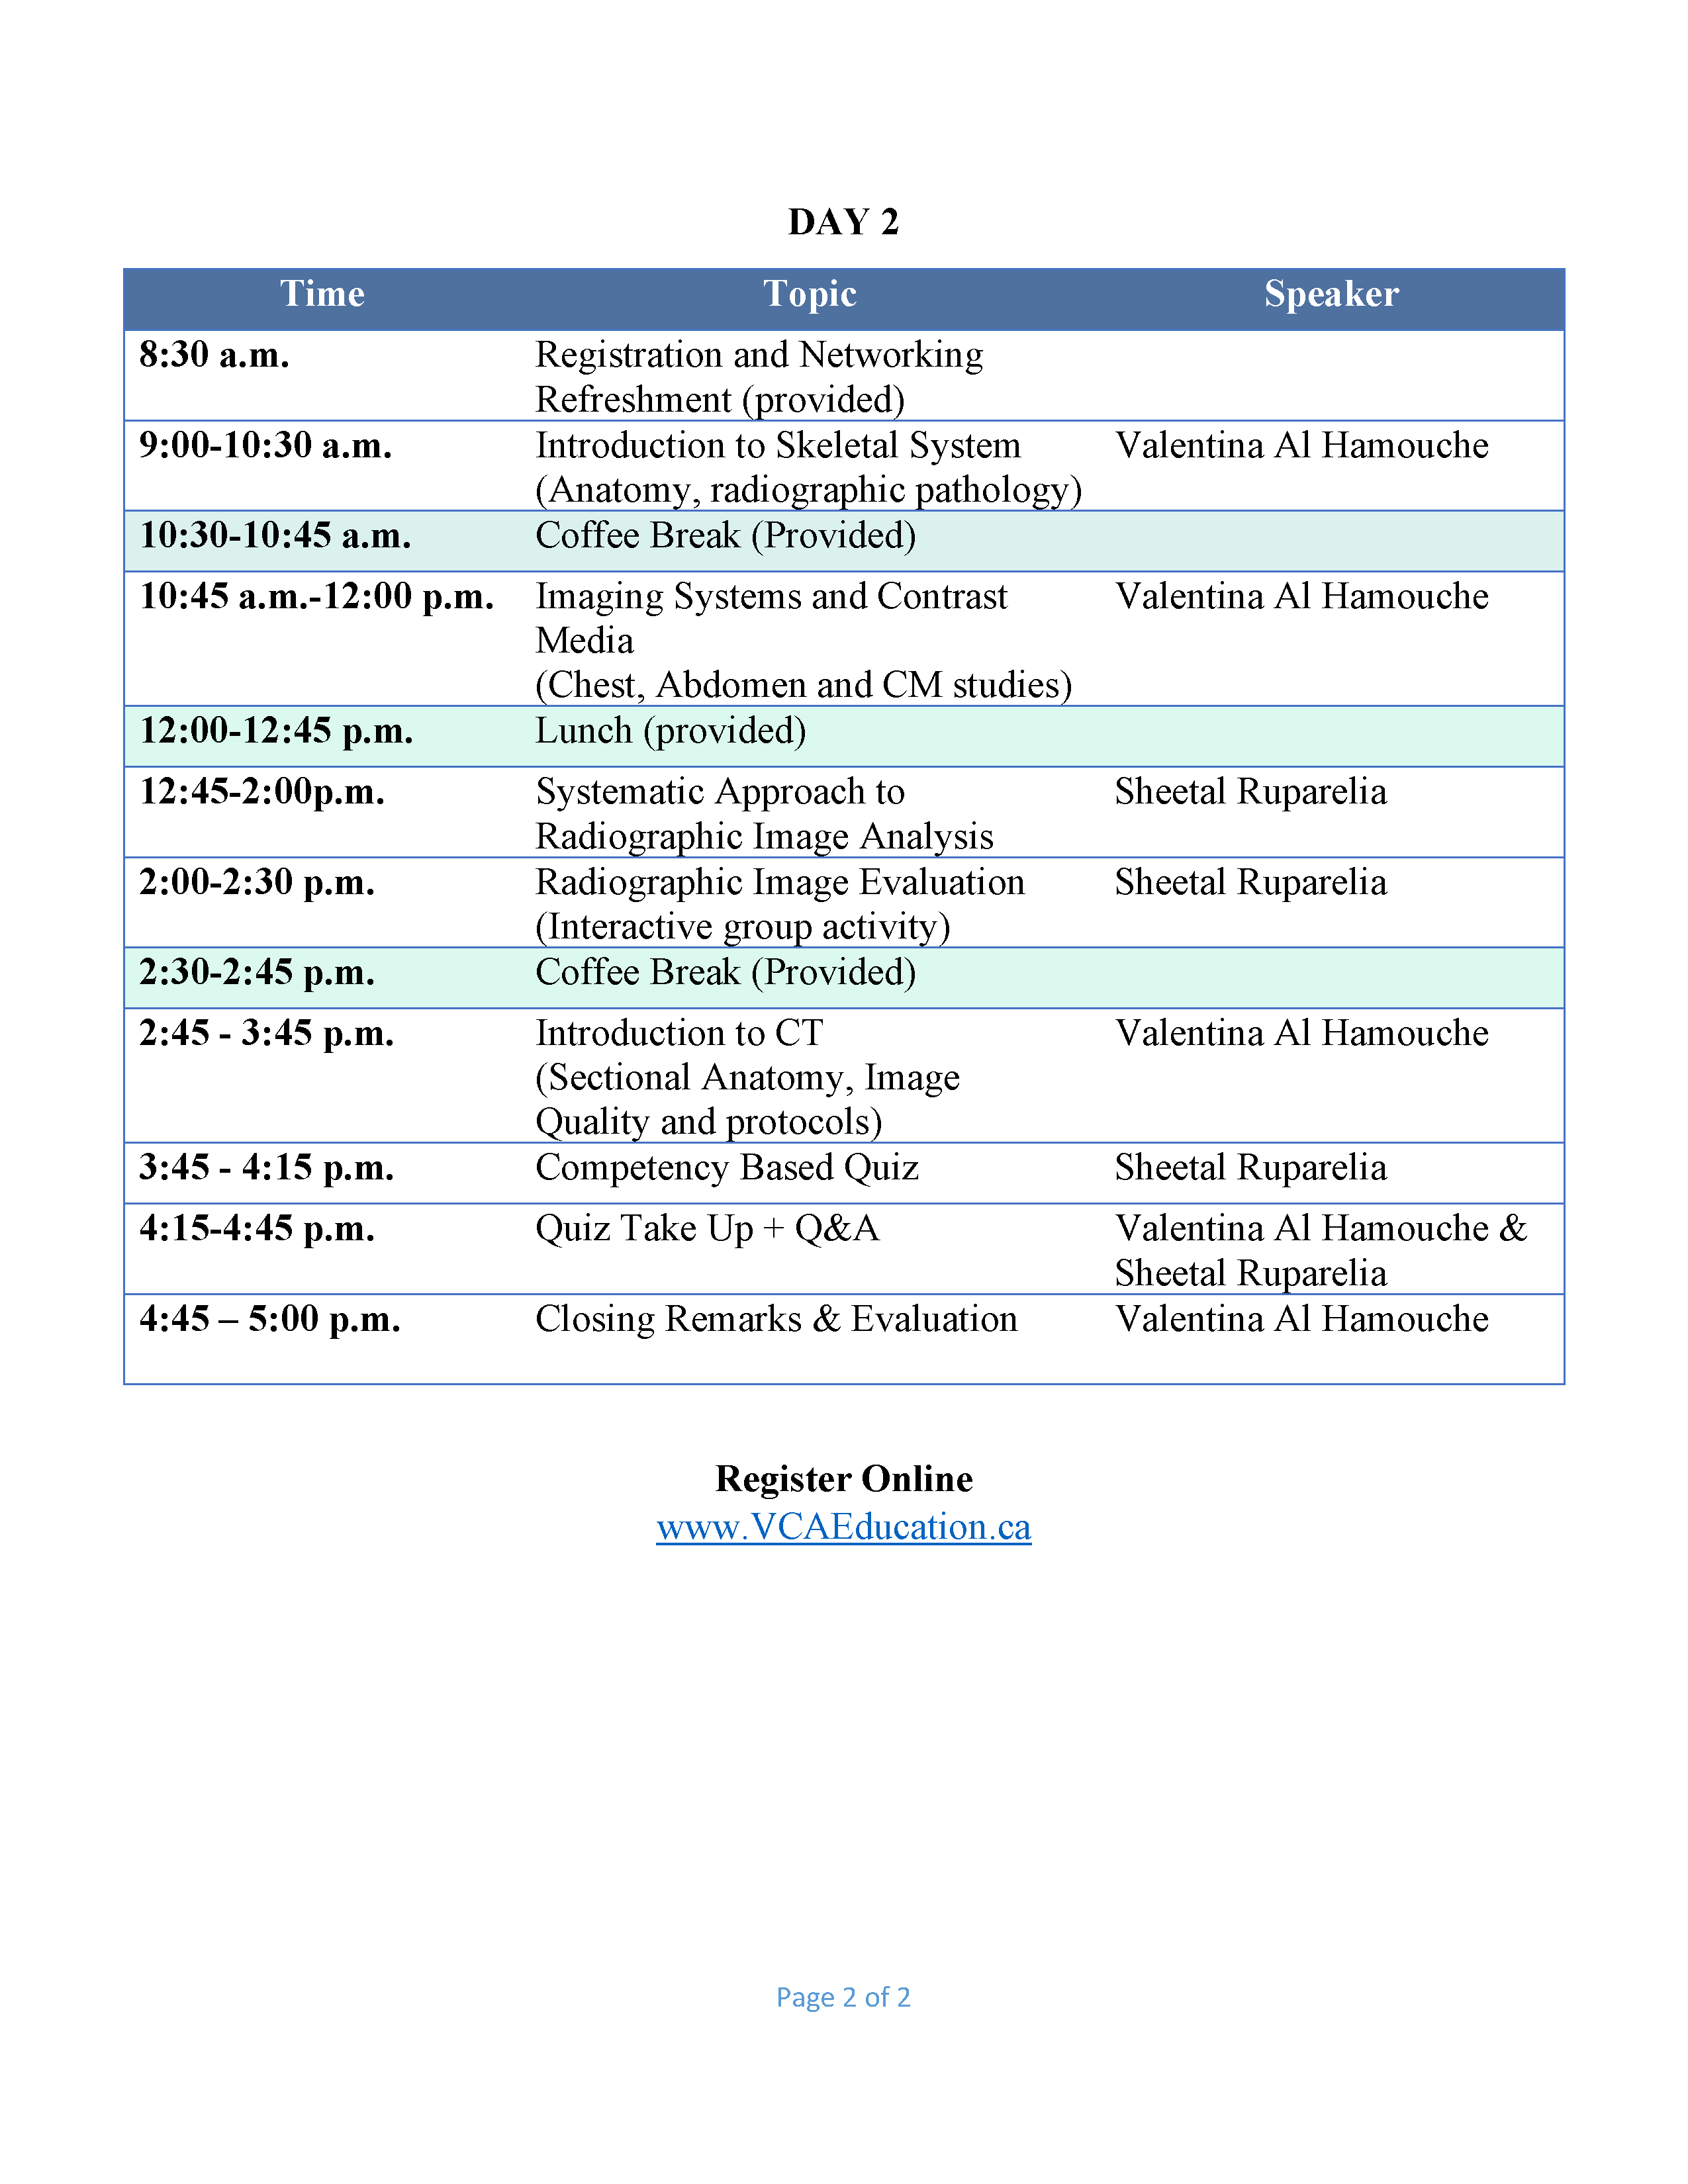 Education Day Schedule Day2